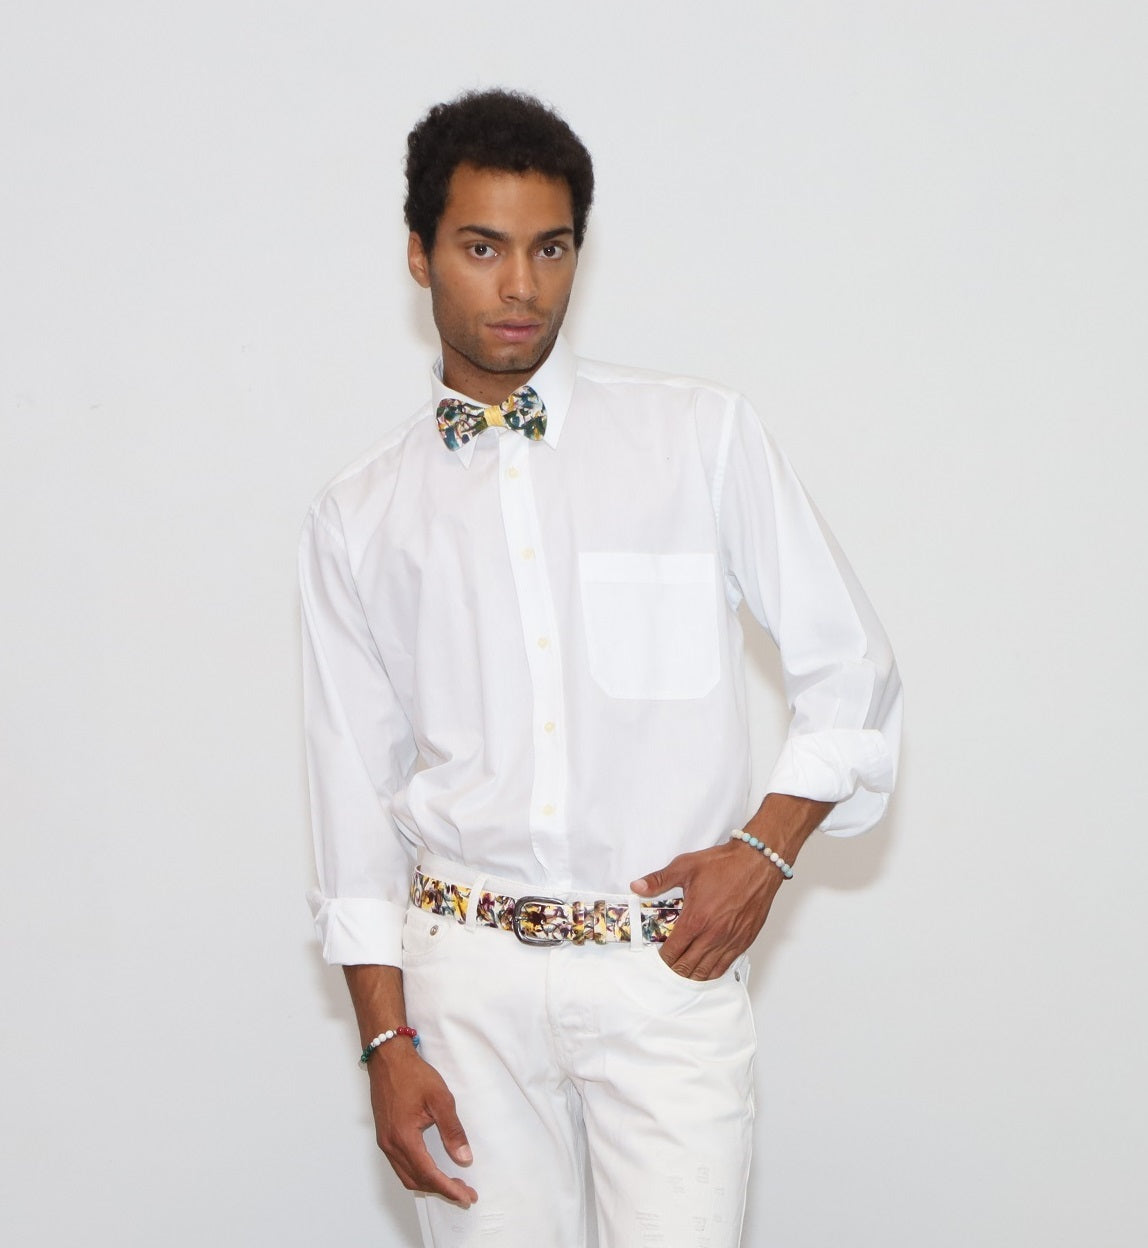 our model wearing white pants and a white shirt with painted bow tie and belt in a white background